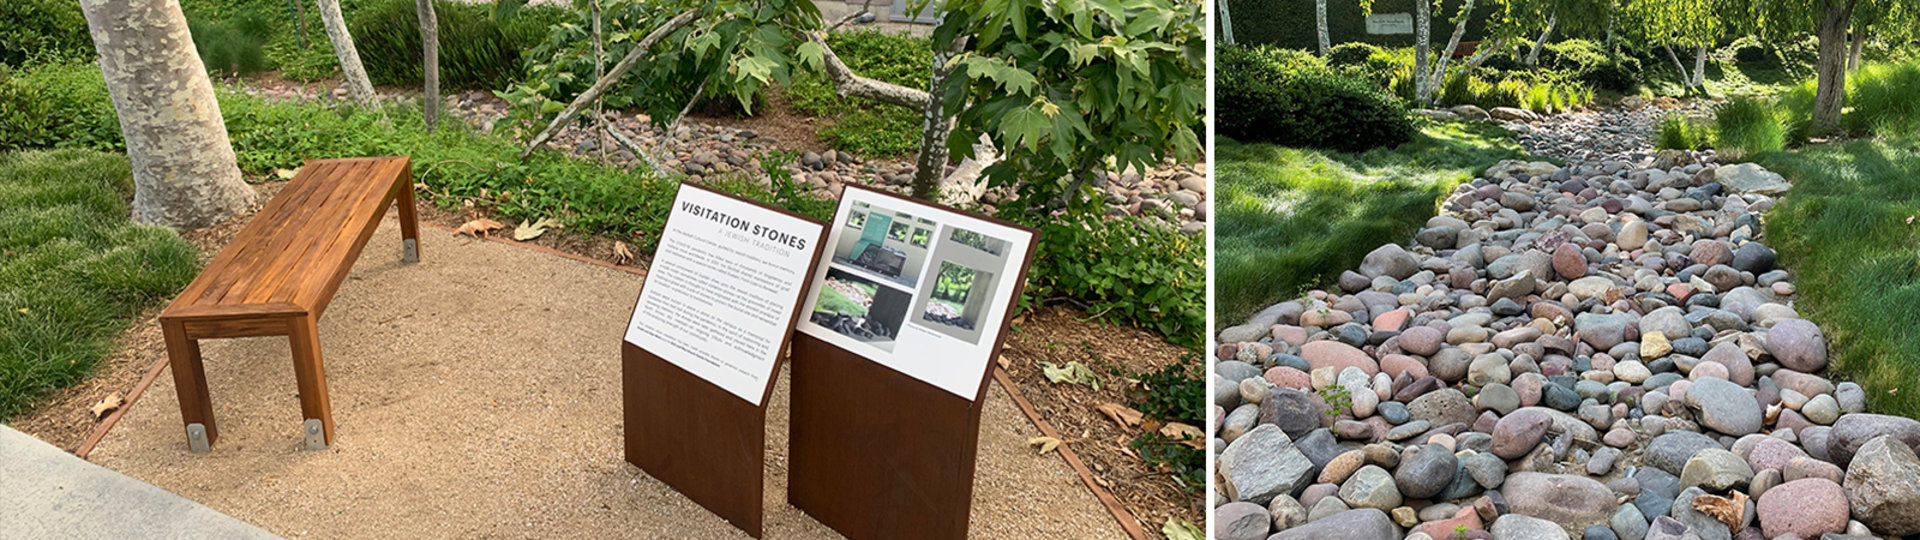 Photos of the Sustain project bench and Arroyo riverbed at the Skirball